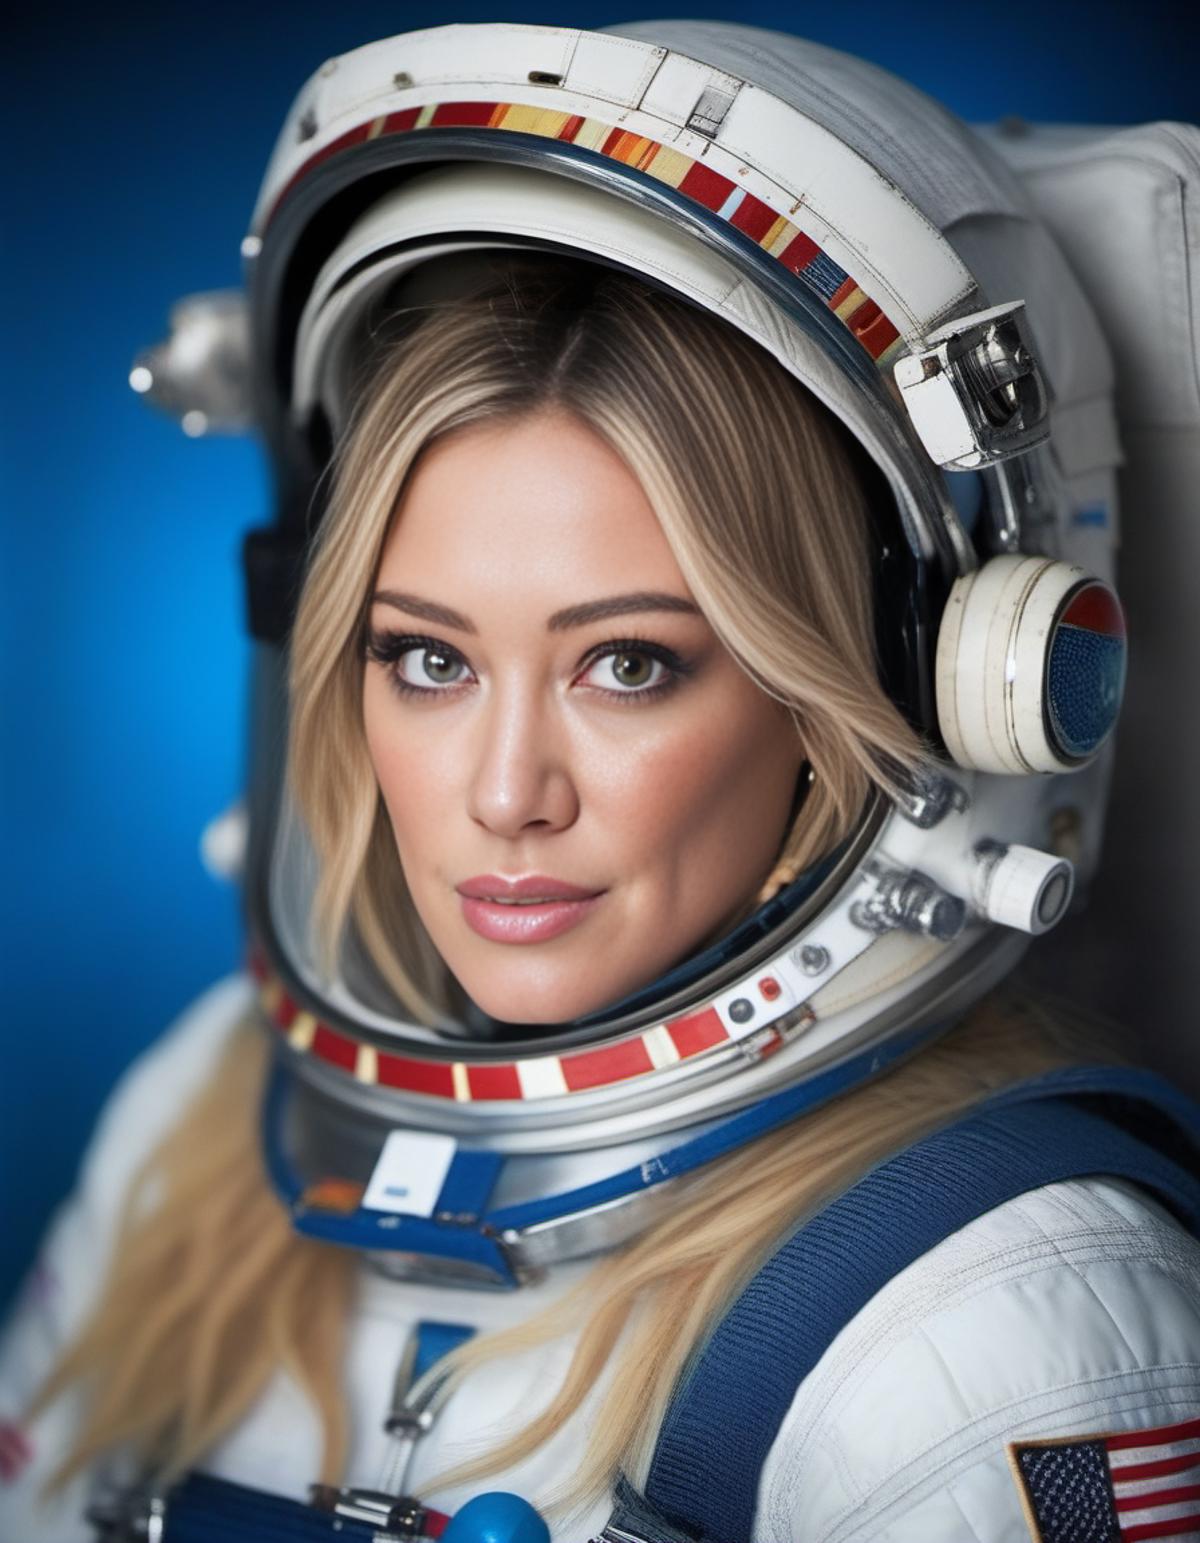 Hilary Duff image by parar20